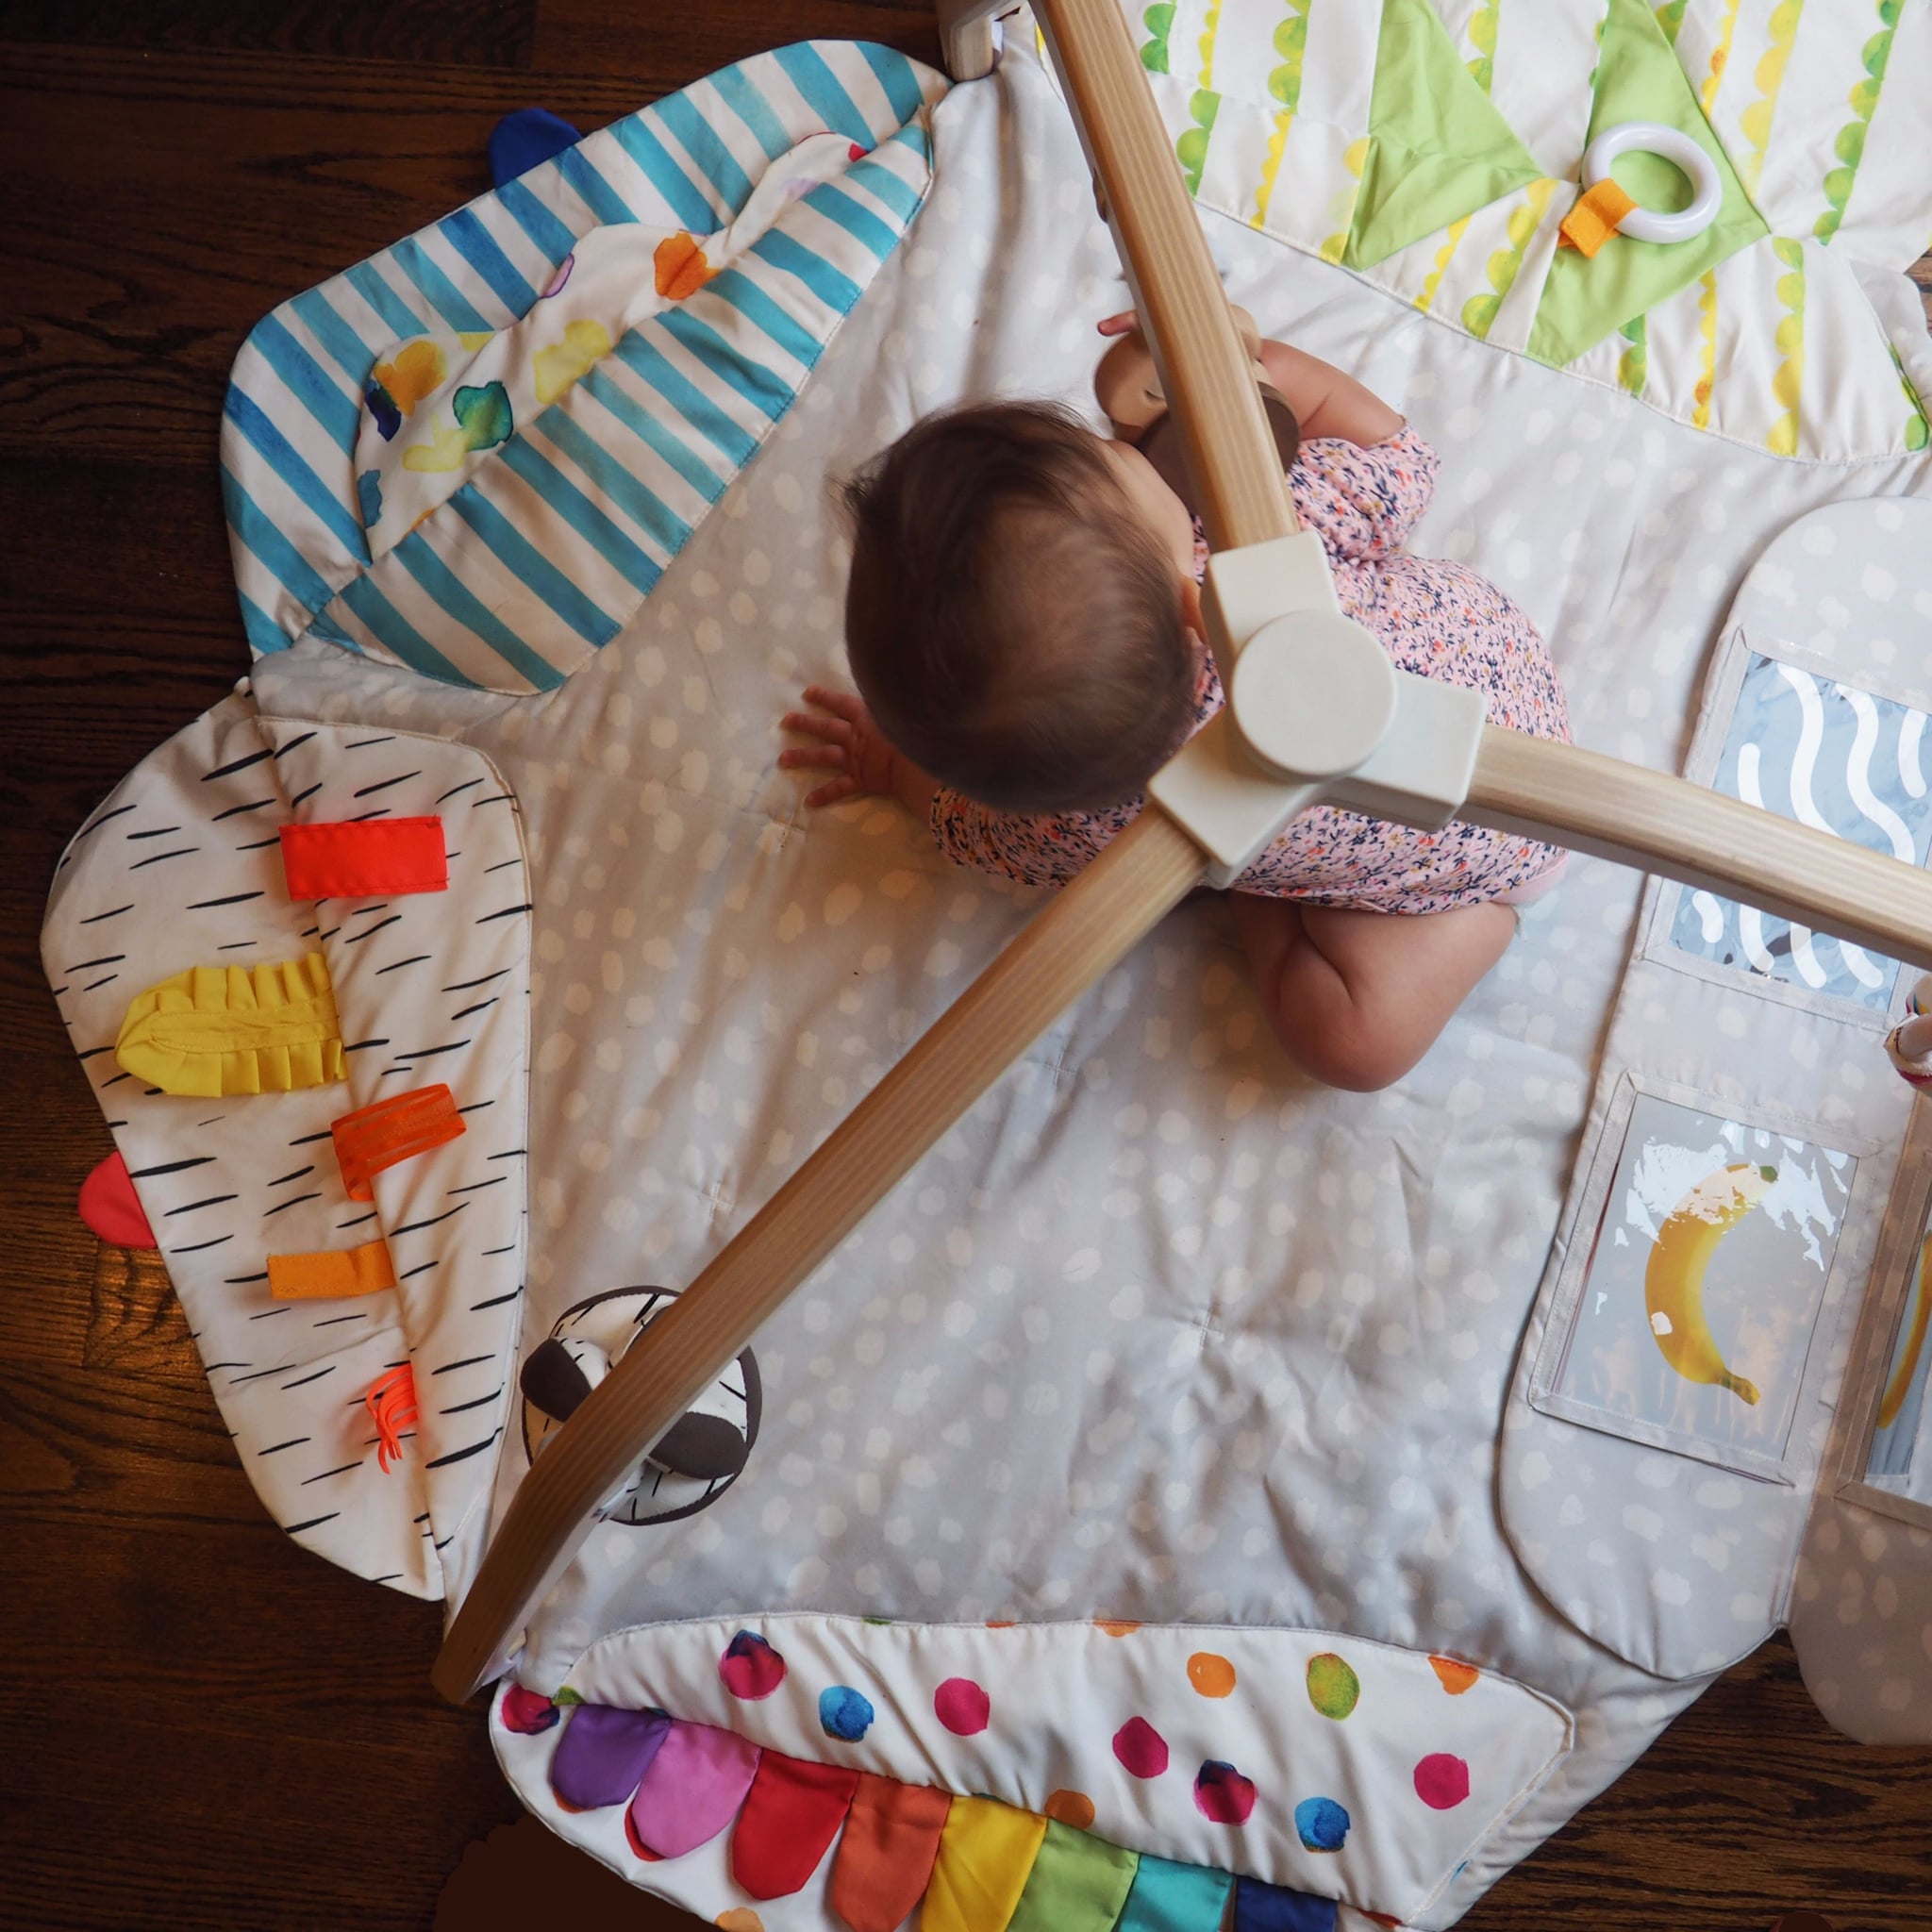 love every baby play mat